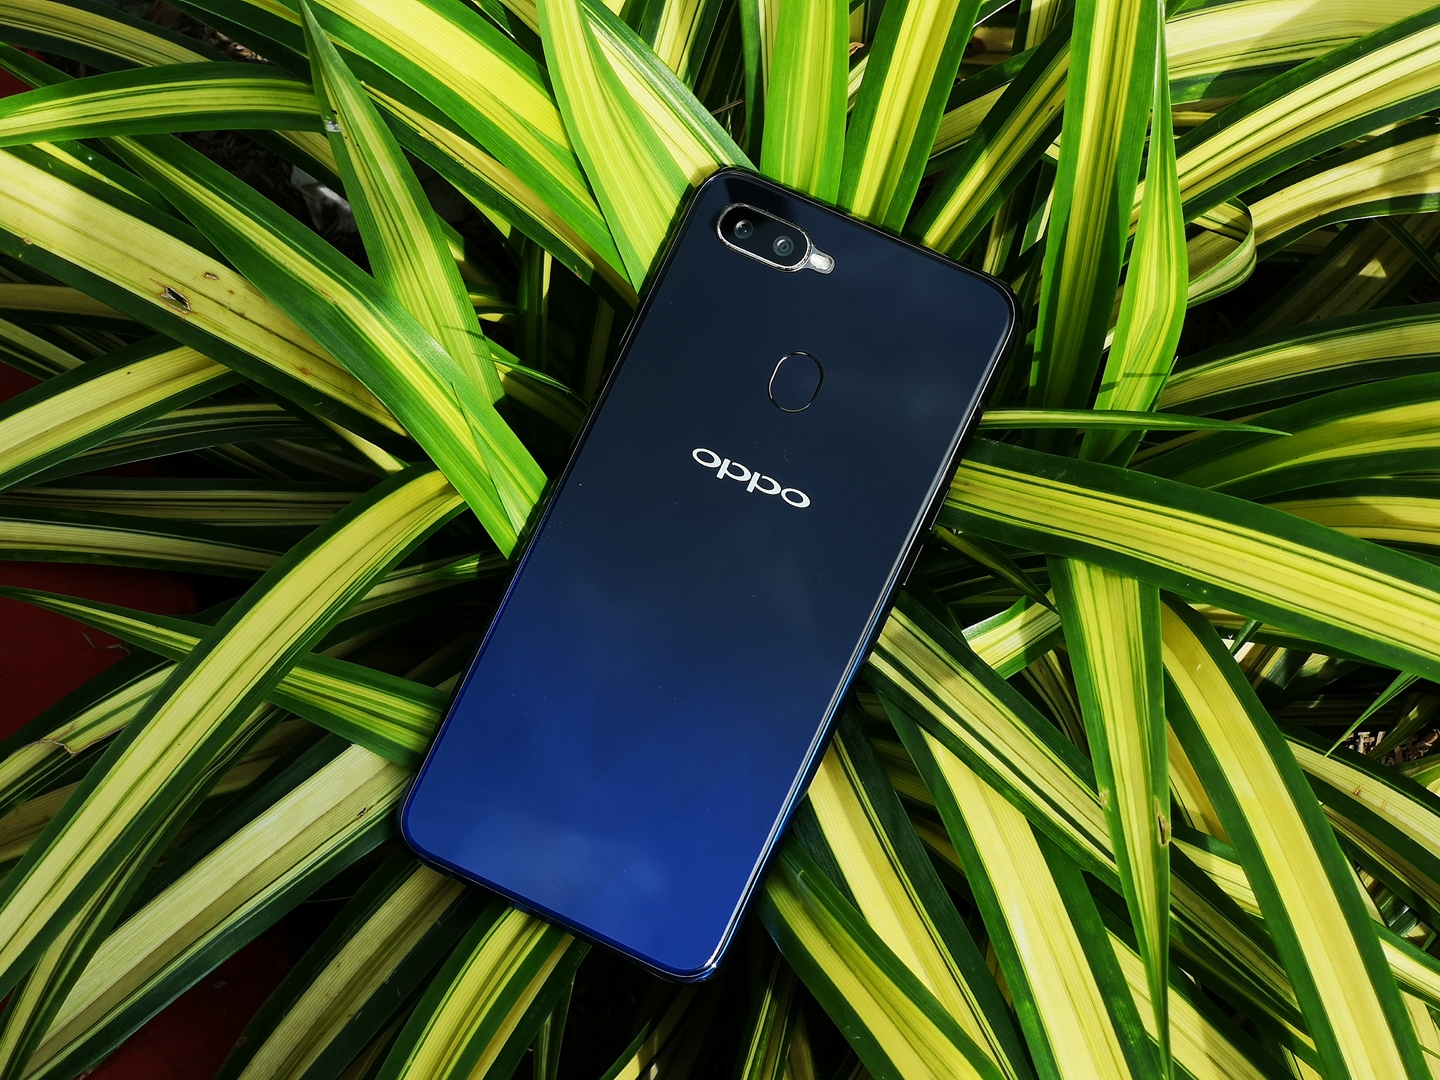 Oppo' Hyper Boost technology will optimize performance & gaming